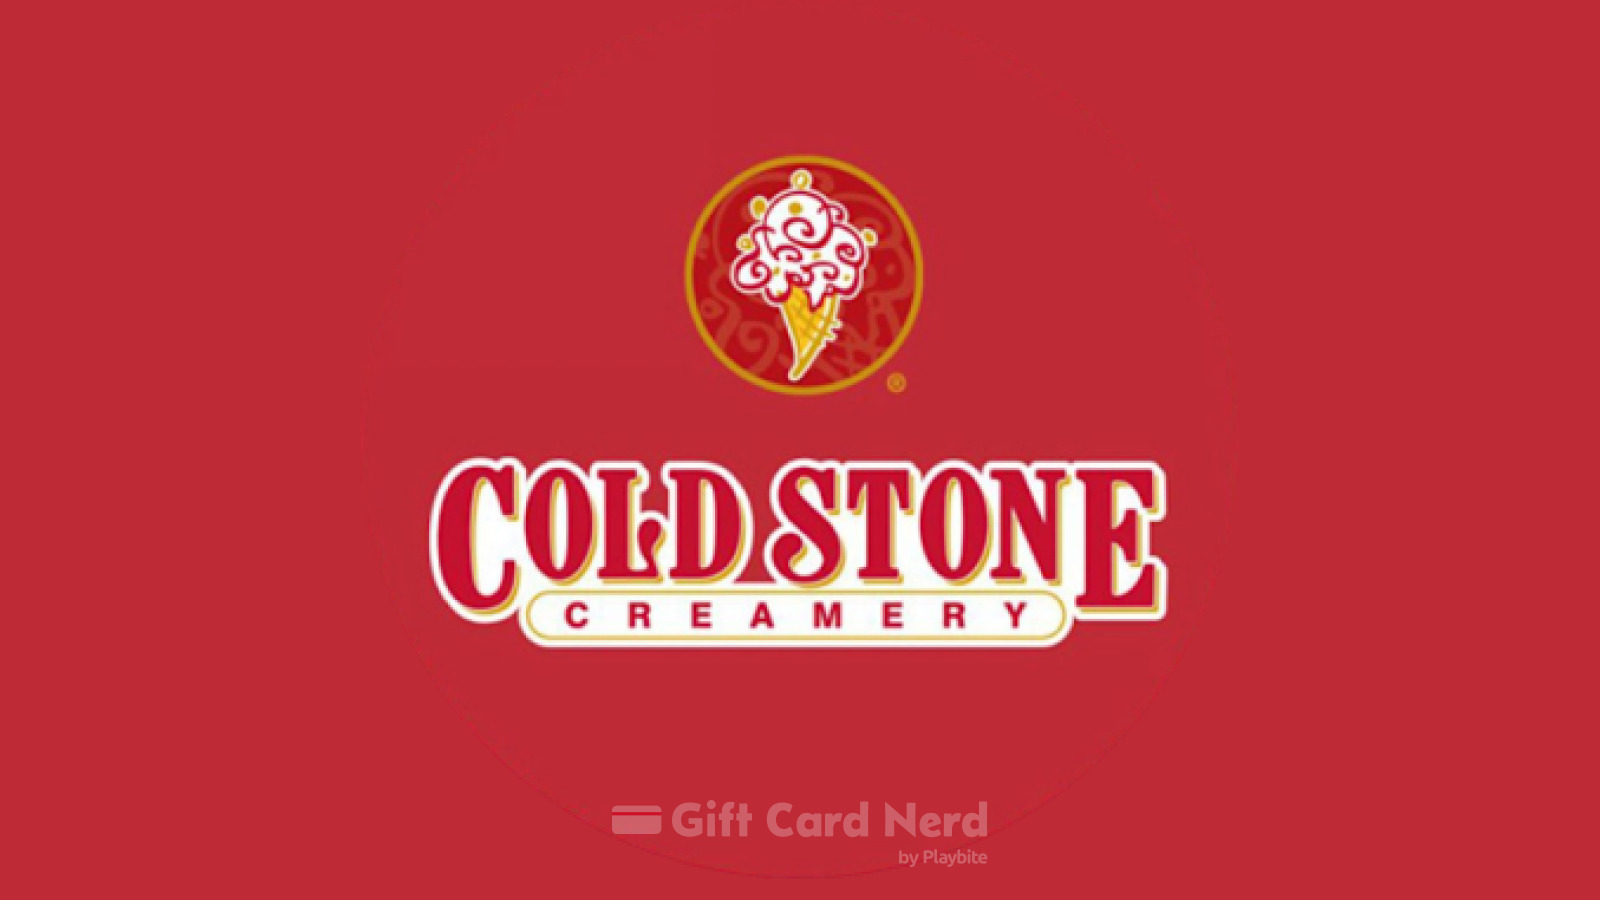 Does Walgreens Sell Cold Stone Creamery Gift Cards?